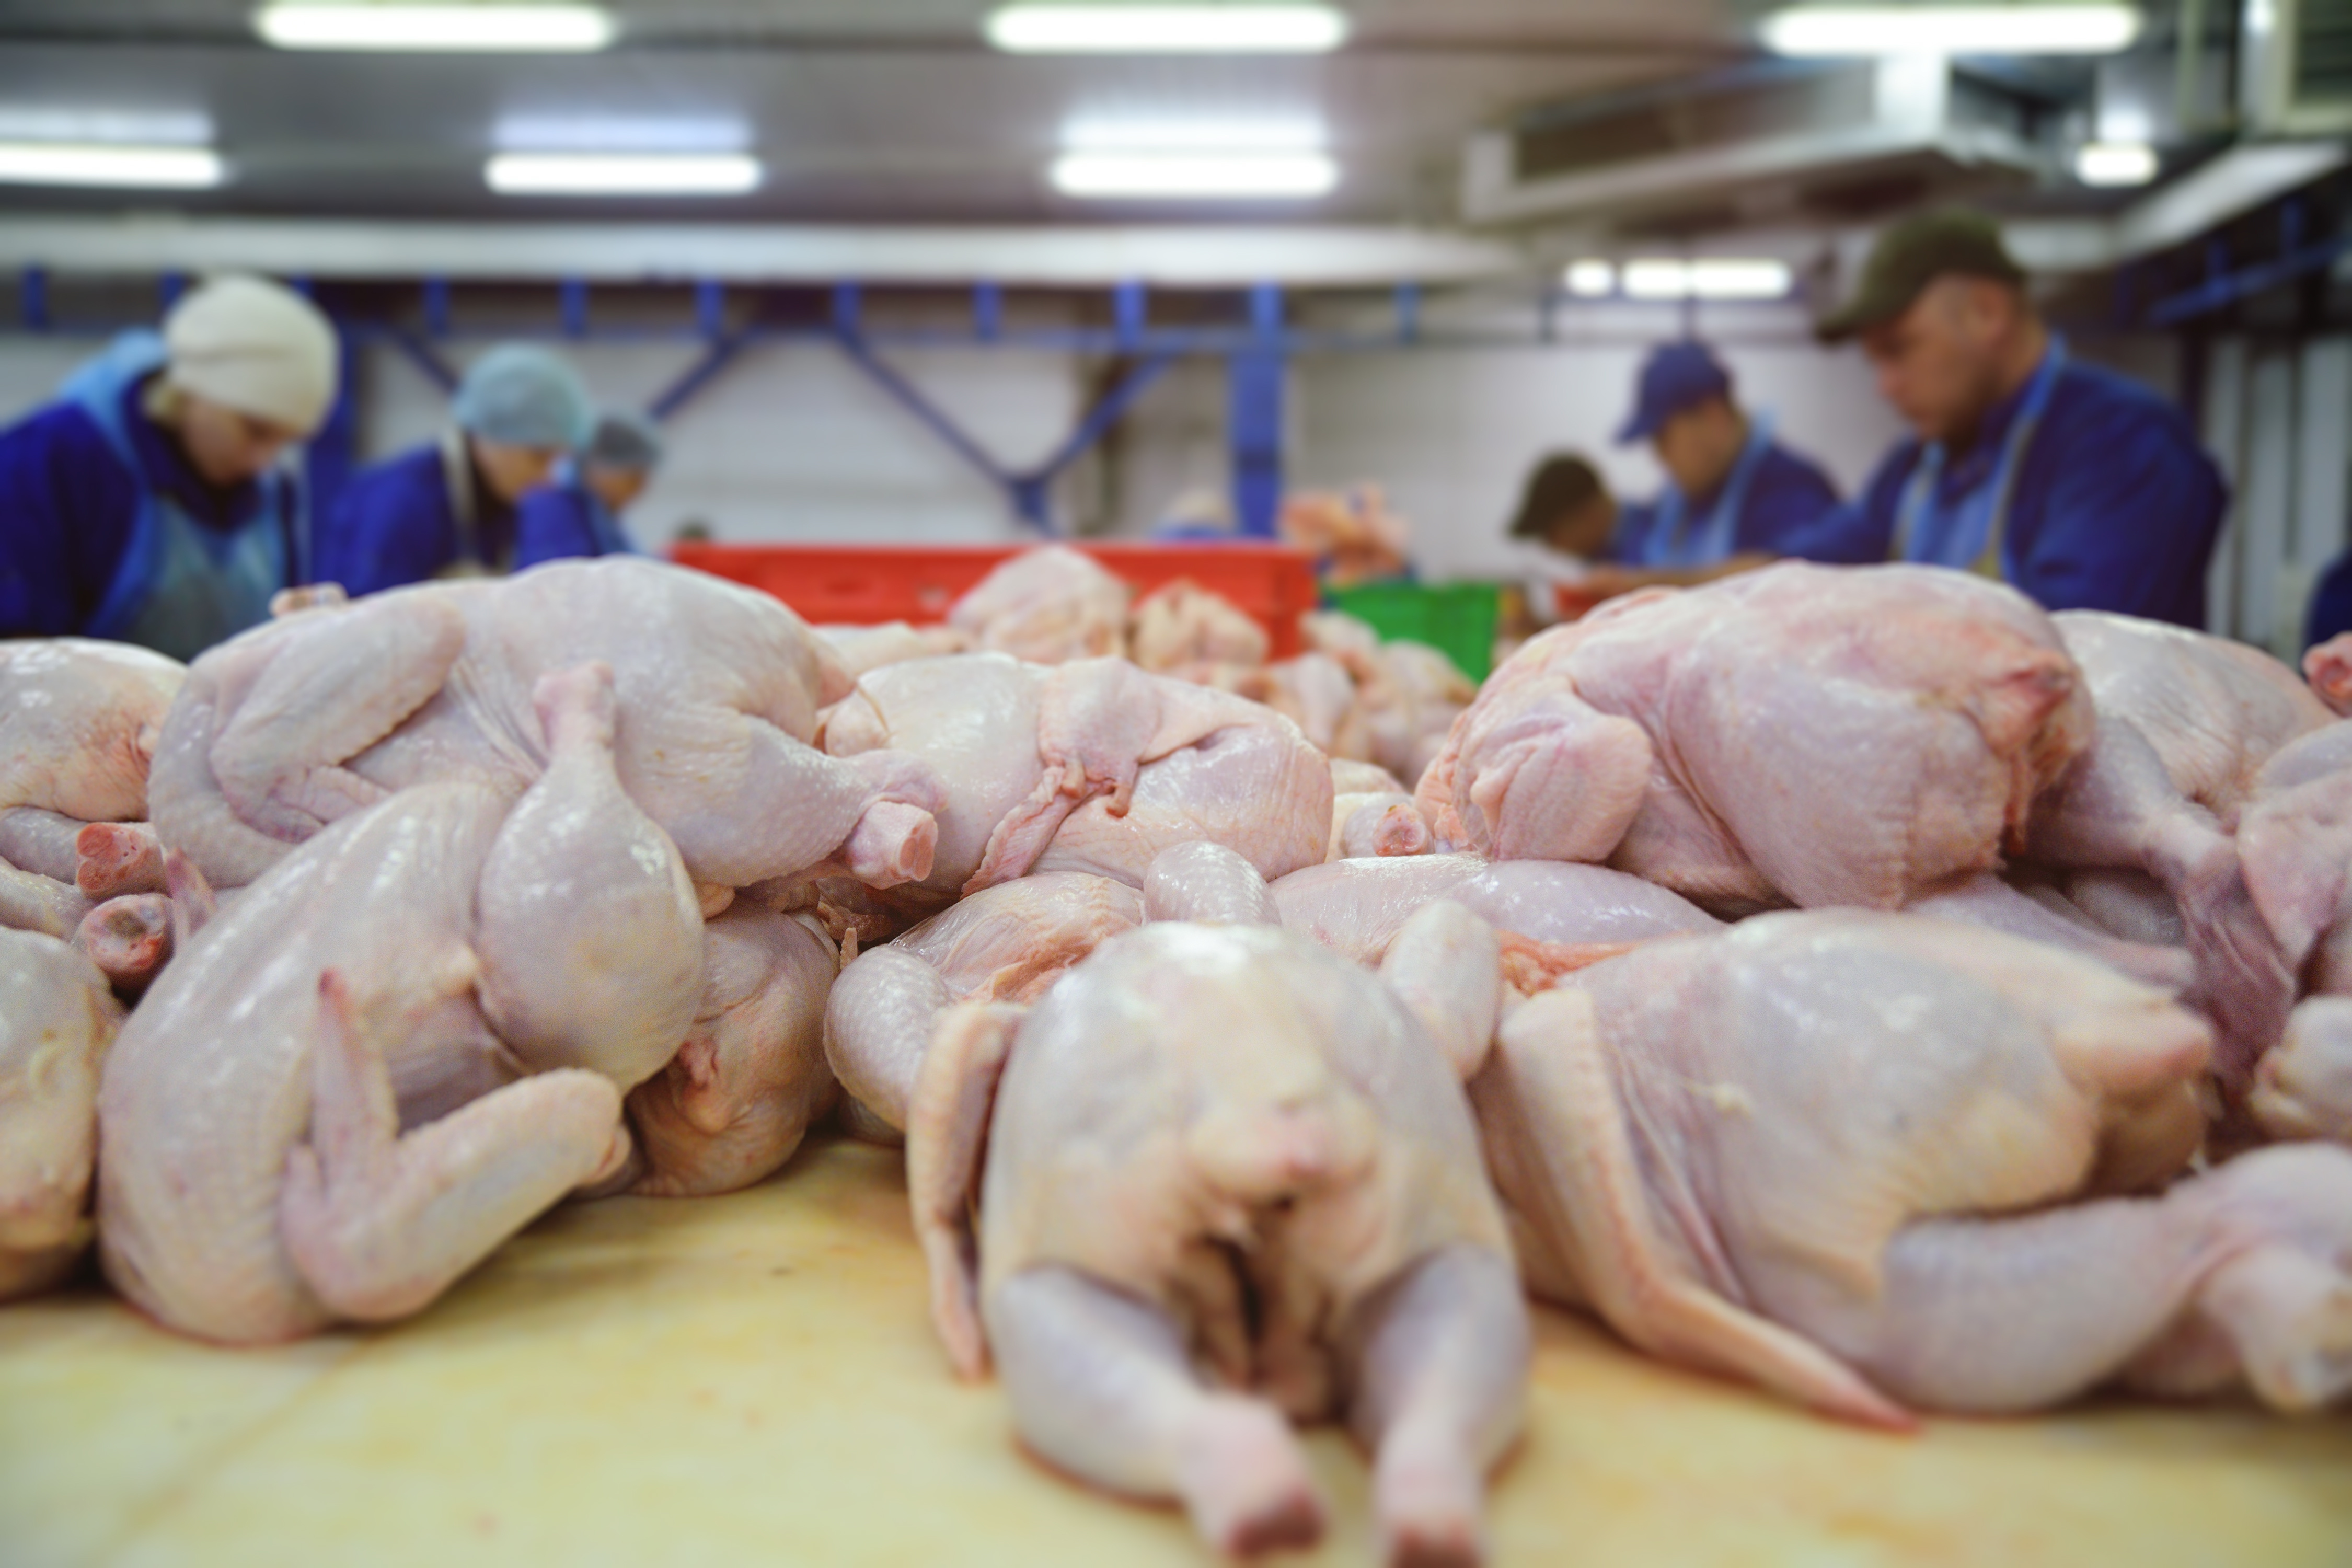 Raw chicken sickens 92 with antibiotic-resistant 